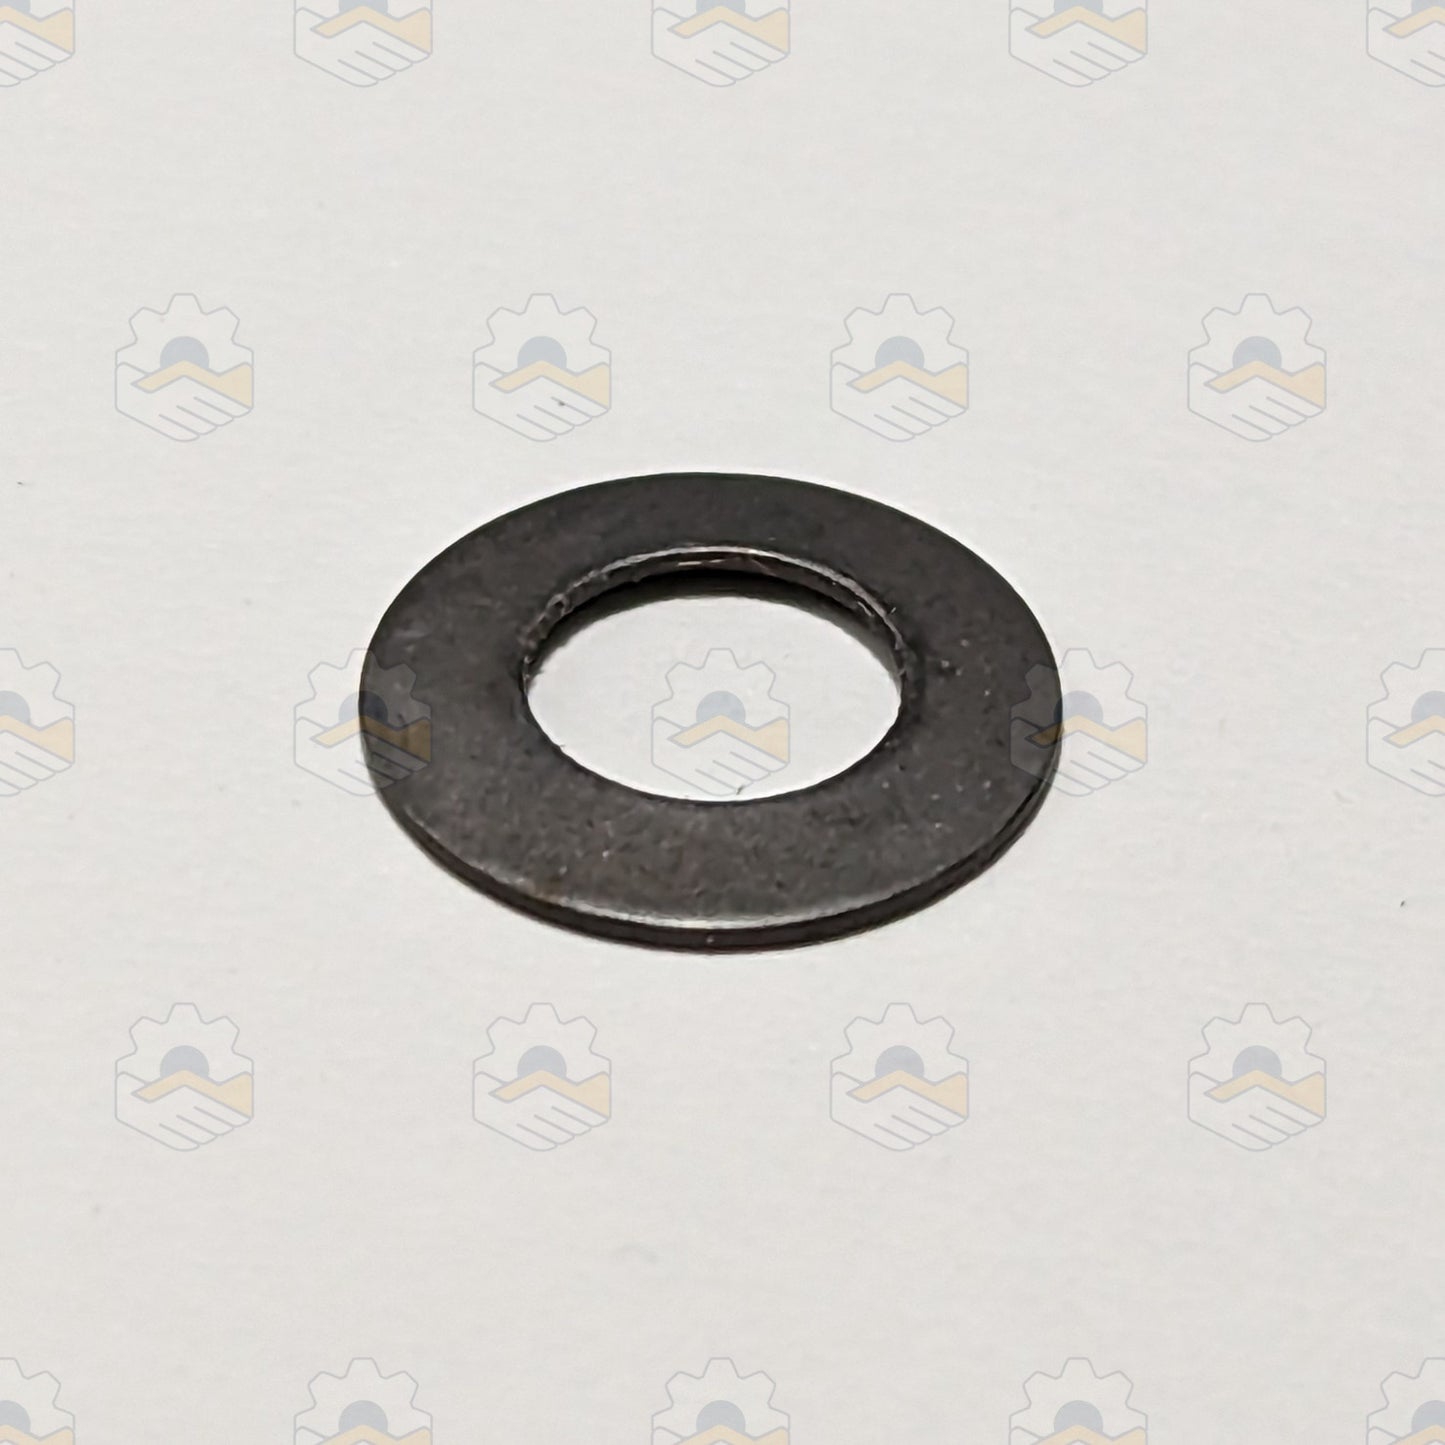 DISC SPRING WASHER